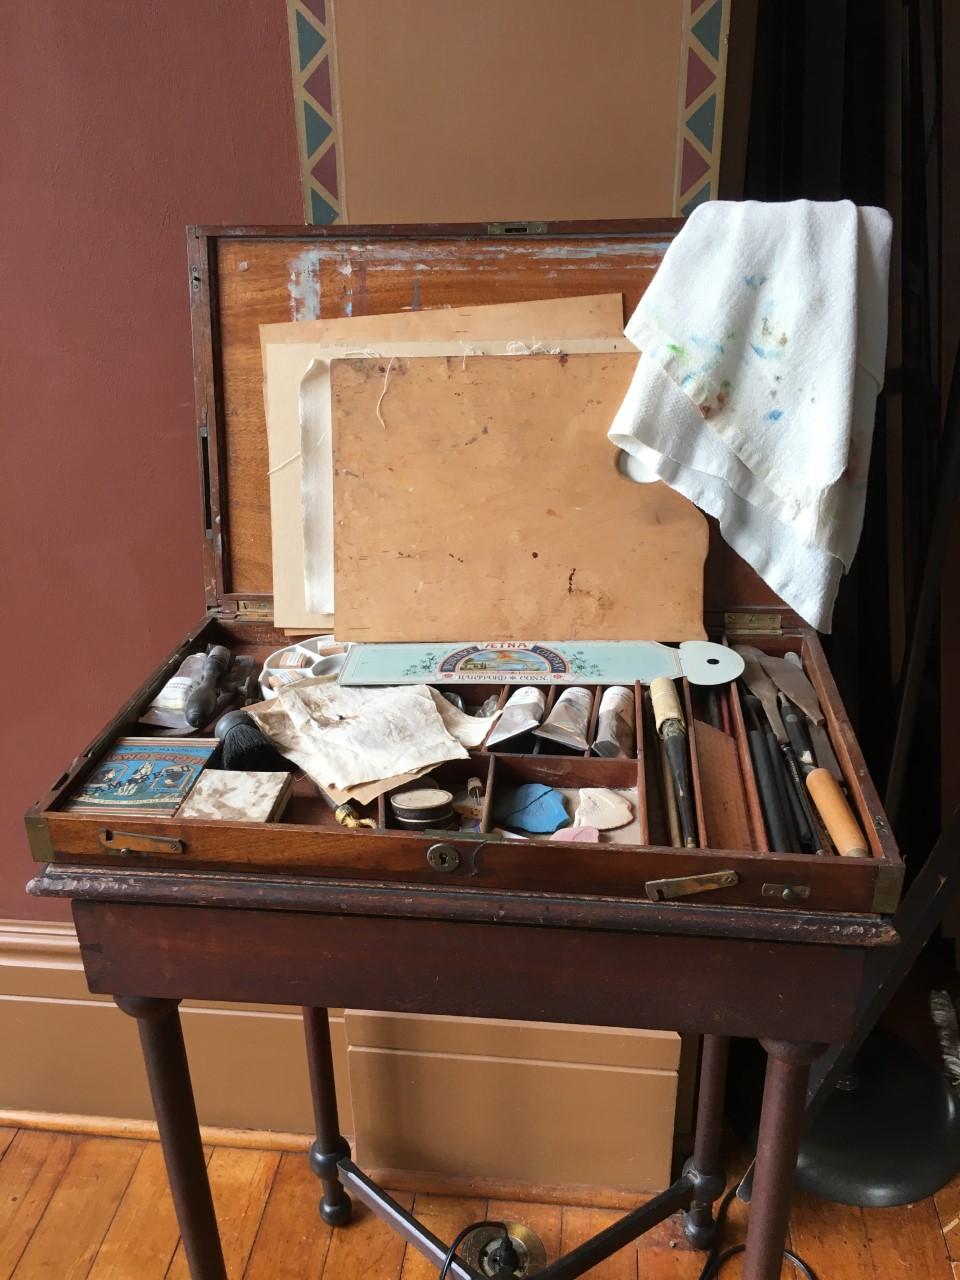 A photograph of a suitcase